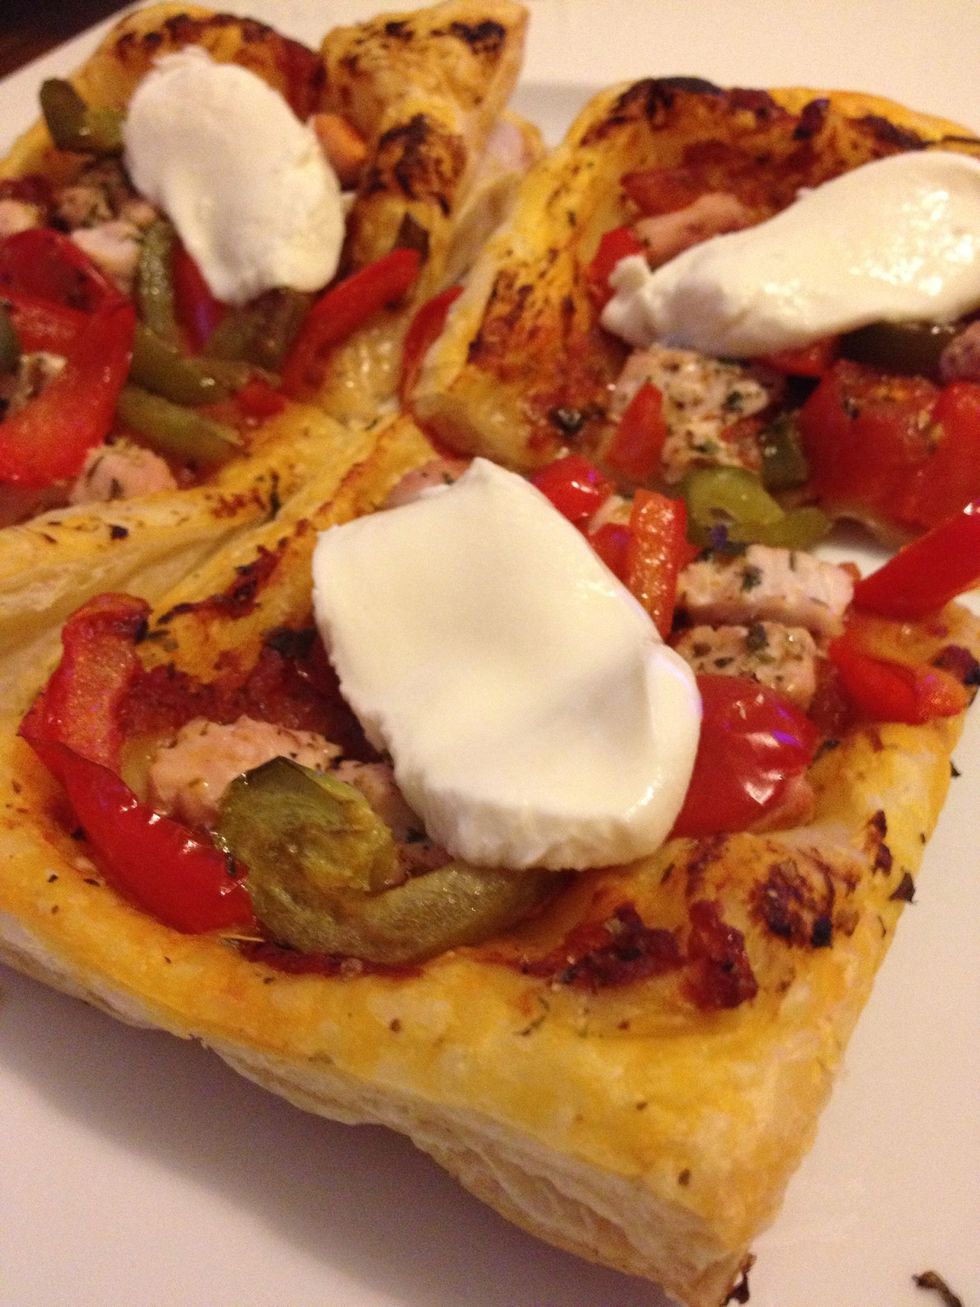 Not enough calories? Add some slices of mozzarella just after taking it out of the oven, it'll melt nicely.